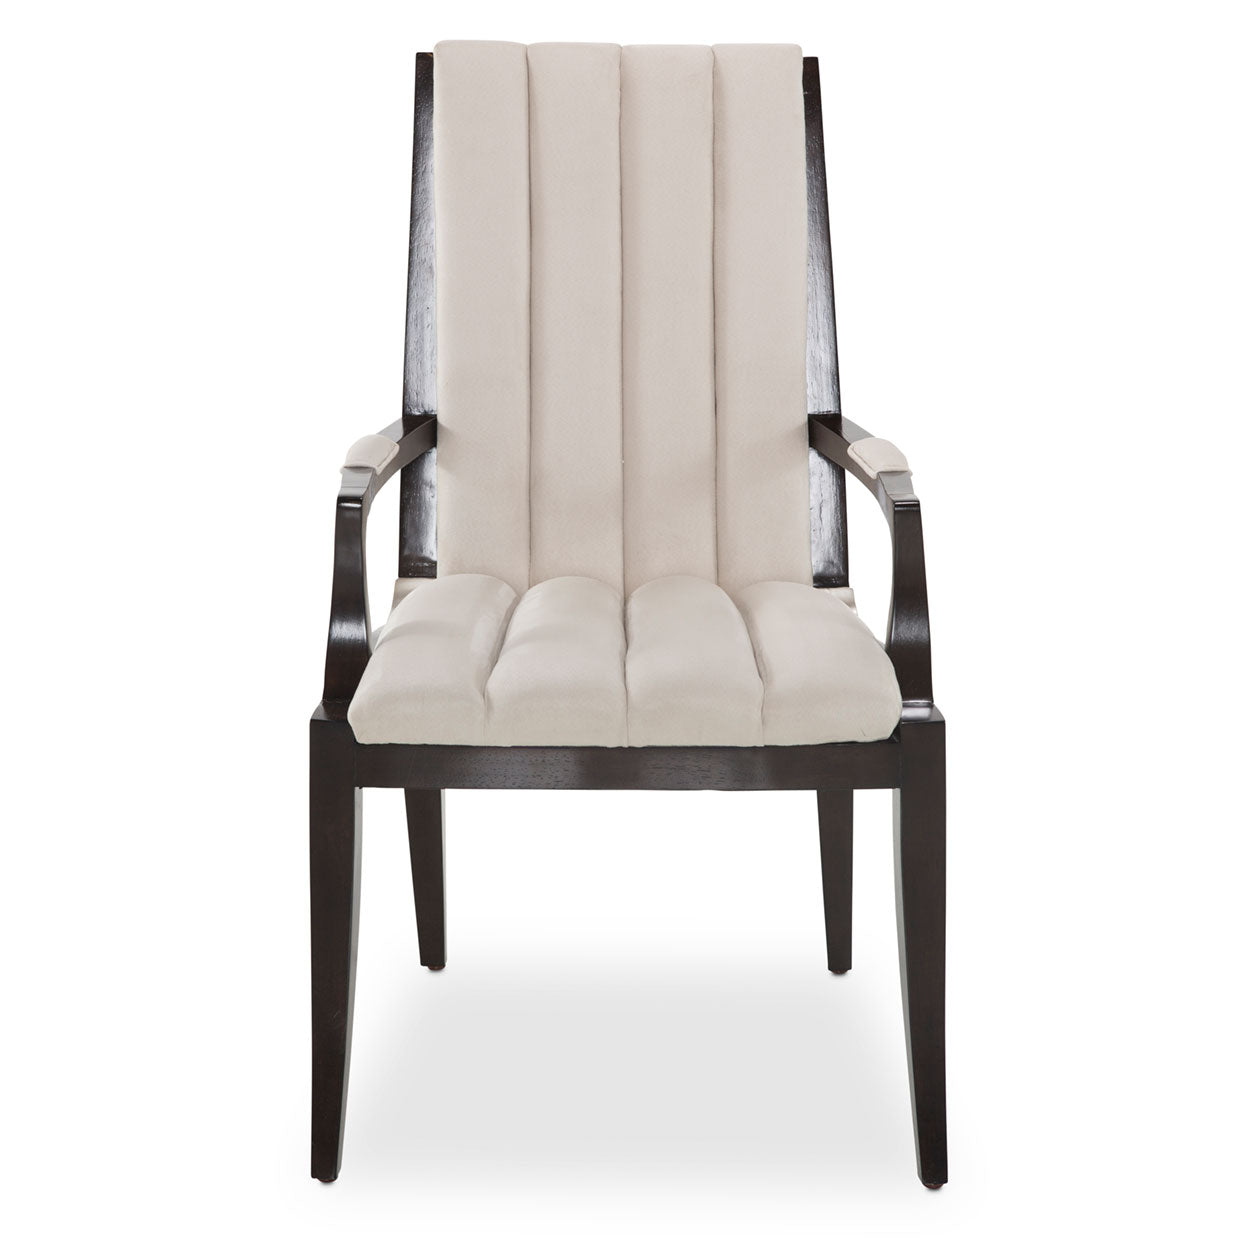 Paris Chic Armchair, Statement piece, Beautiful neutral channeling, Bold frame, Upgrade, Mealtime, Espresso-finished hardwood, Figured Eucalyptus Veneer, Faux suede, upholstery, Channeling, Armrests, Faux suede padding, dream art , Michael amini